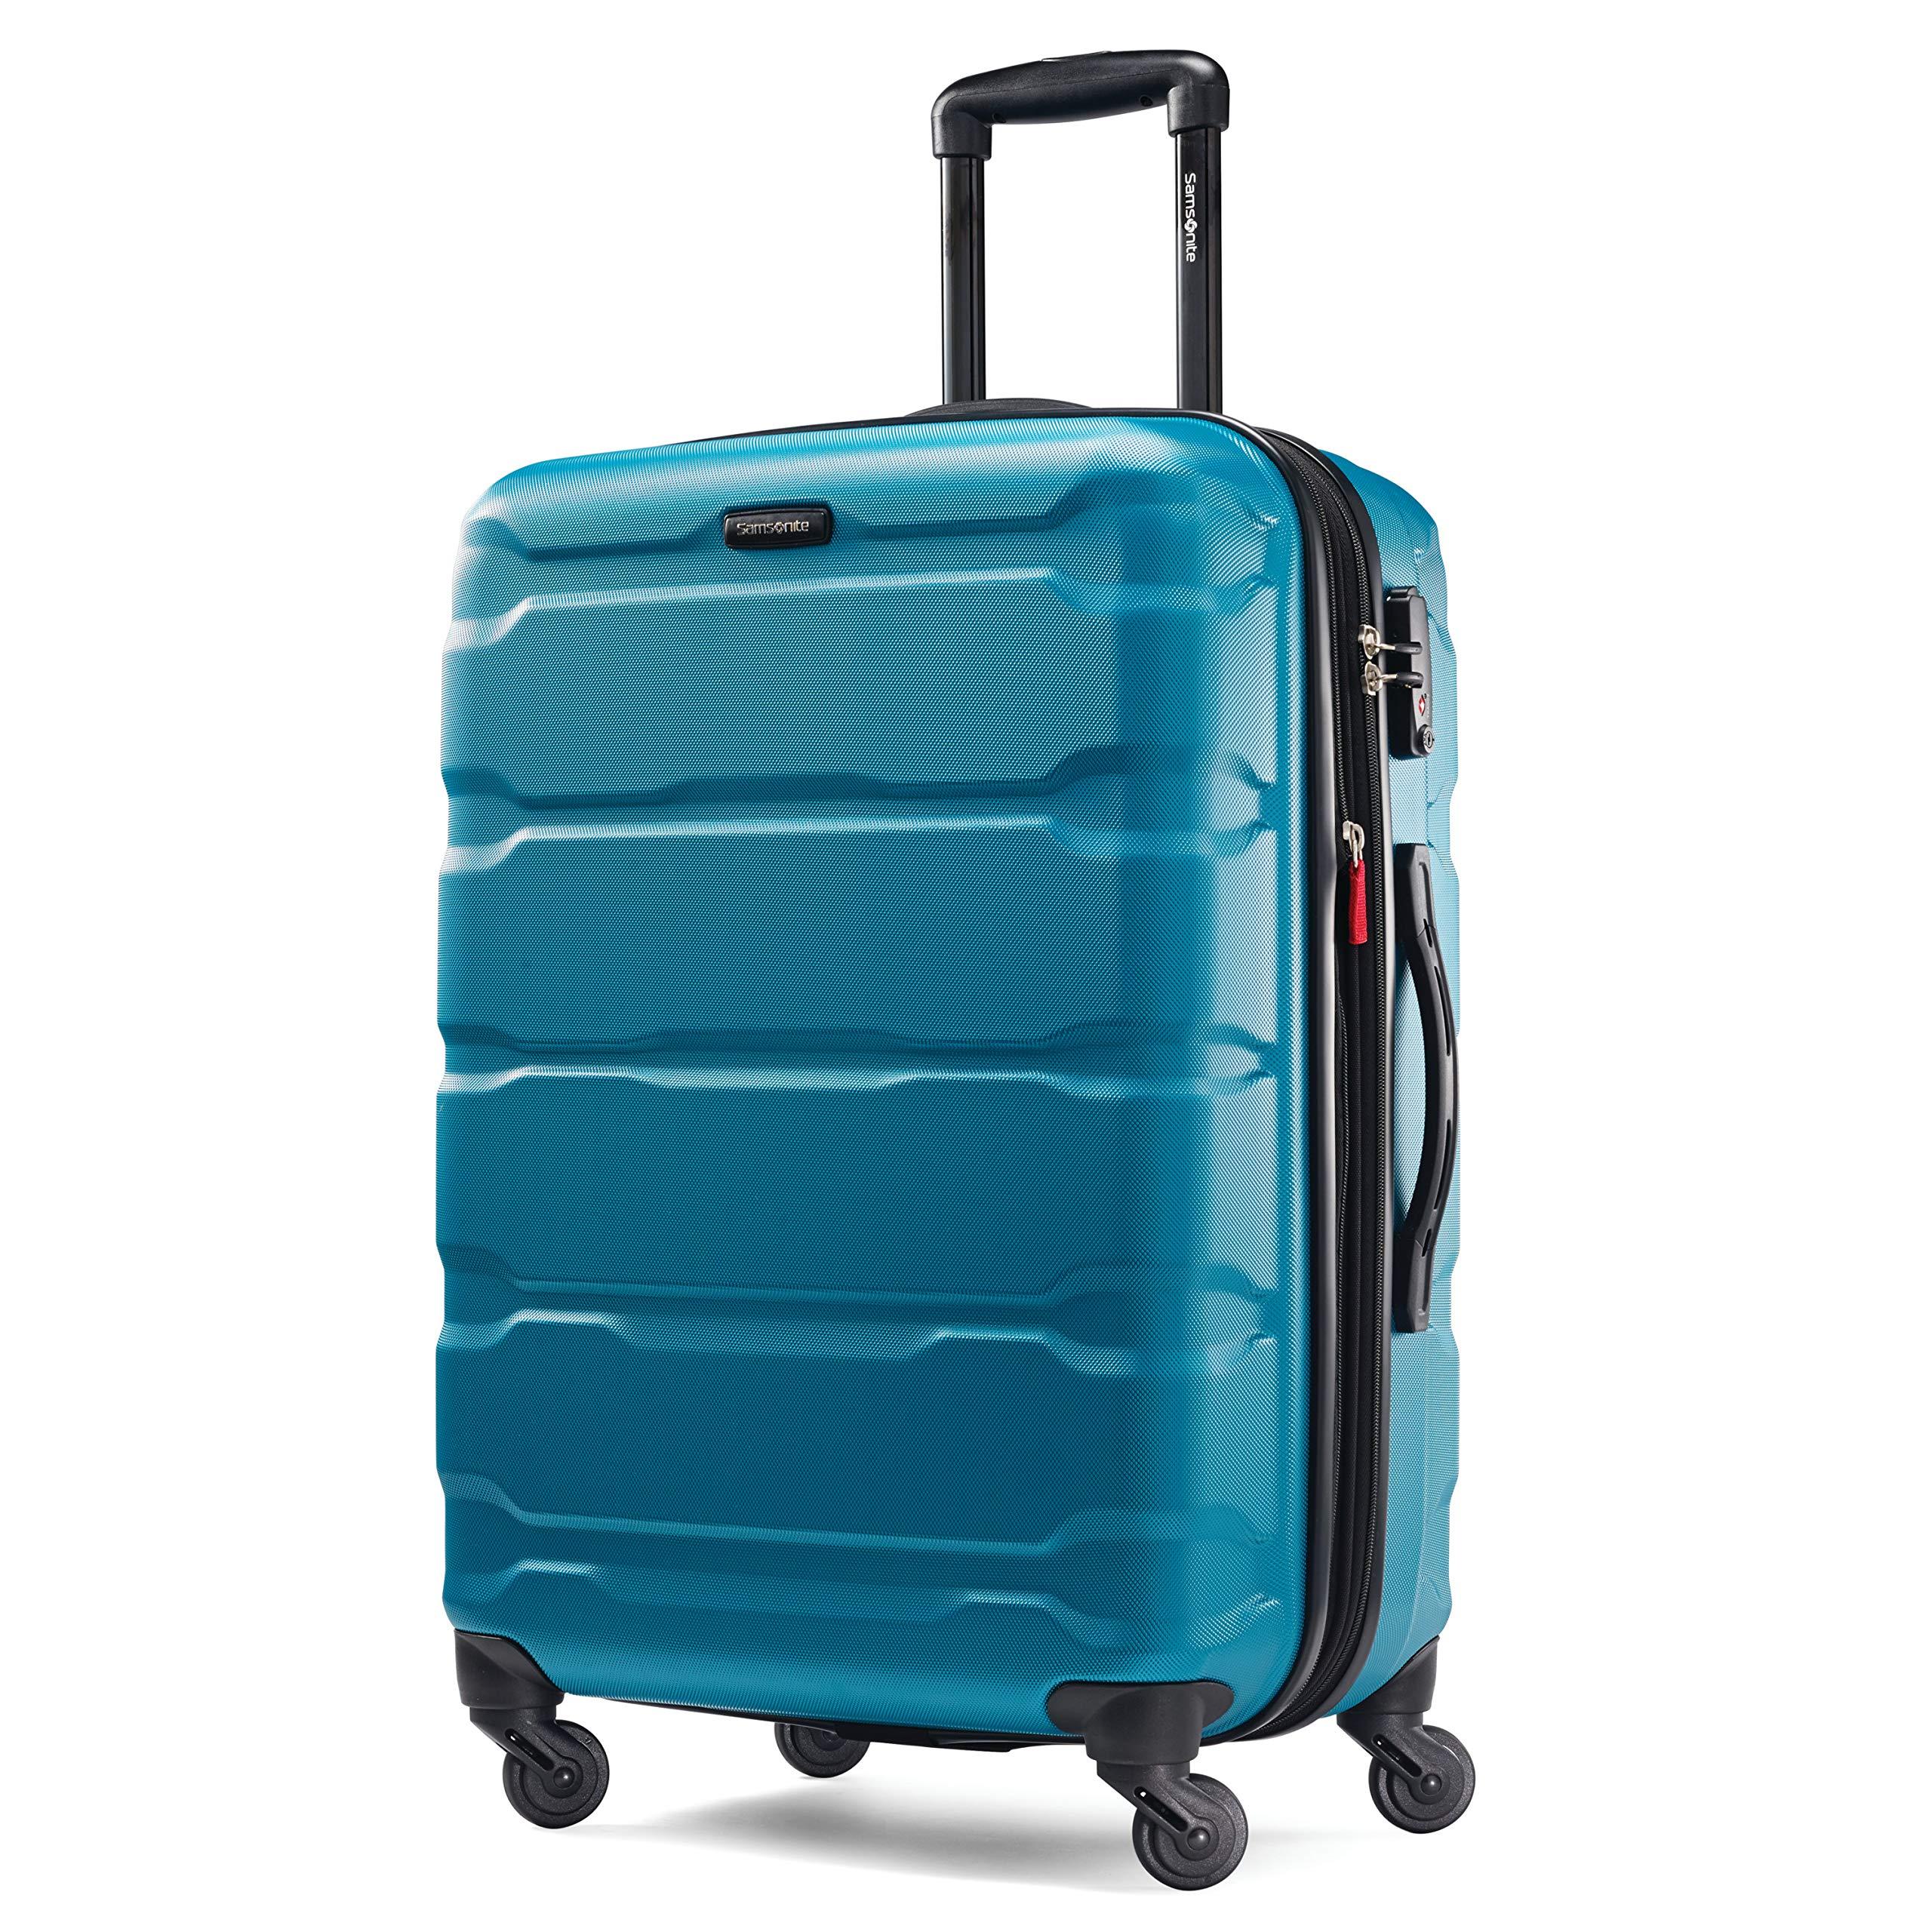 Samsonite Omni Pc Hardside Expandable Luggage With Spinner Wheels in ...